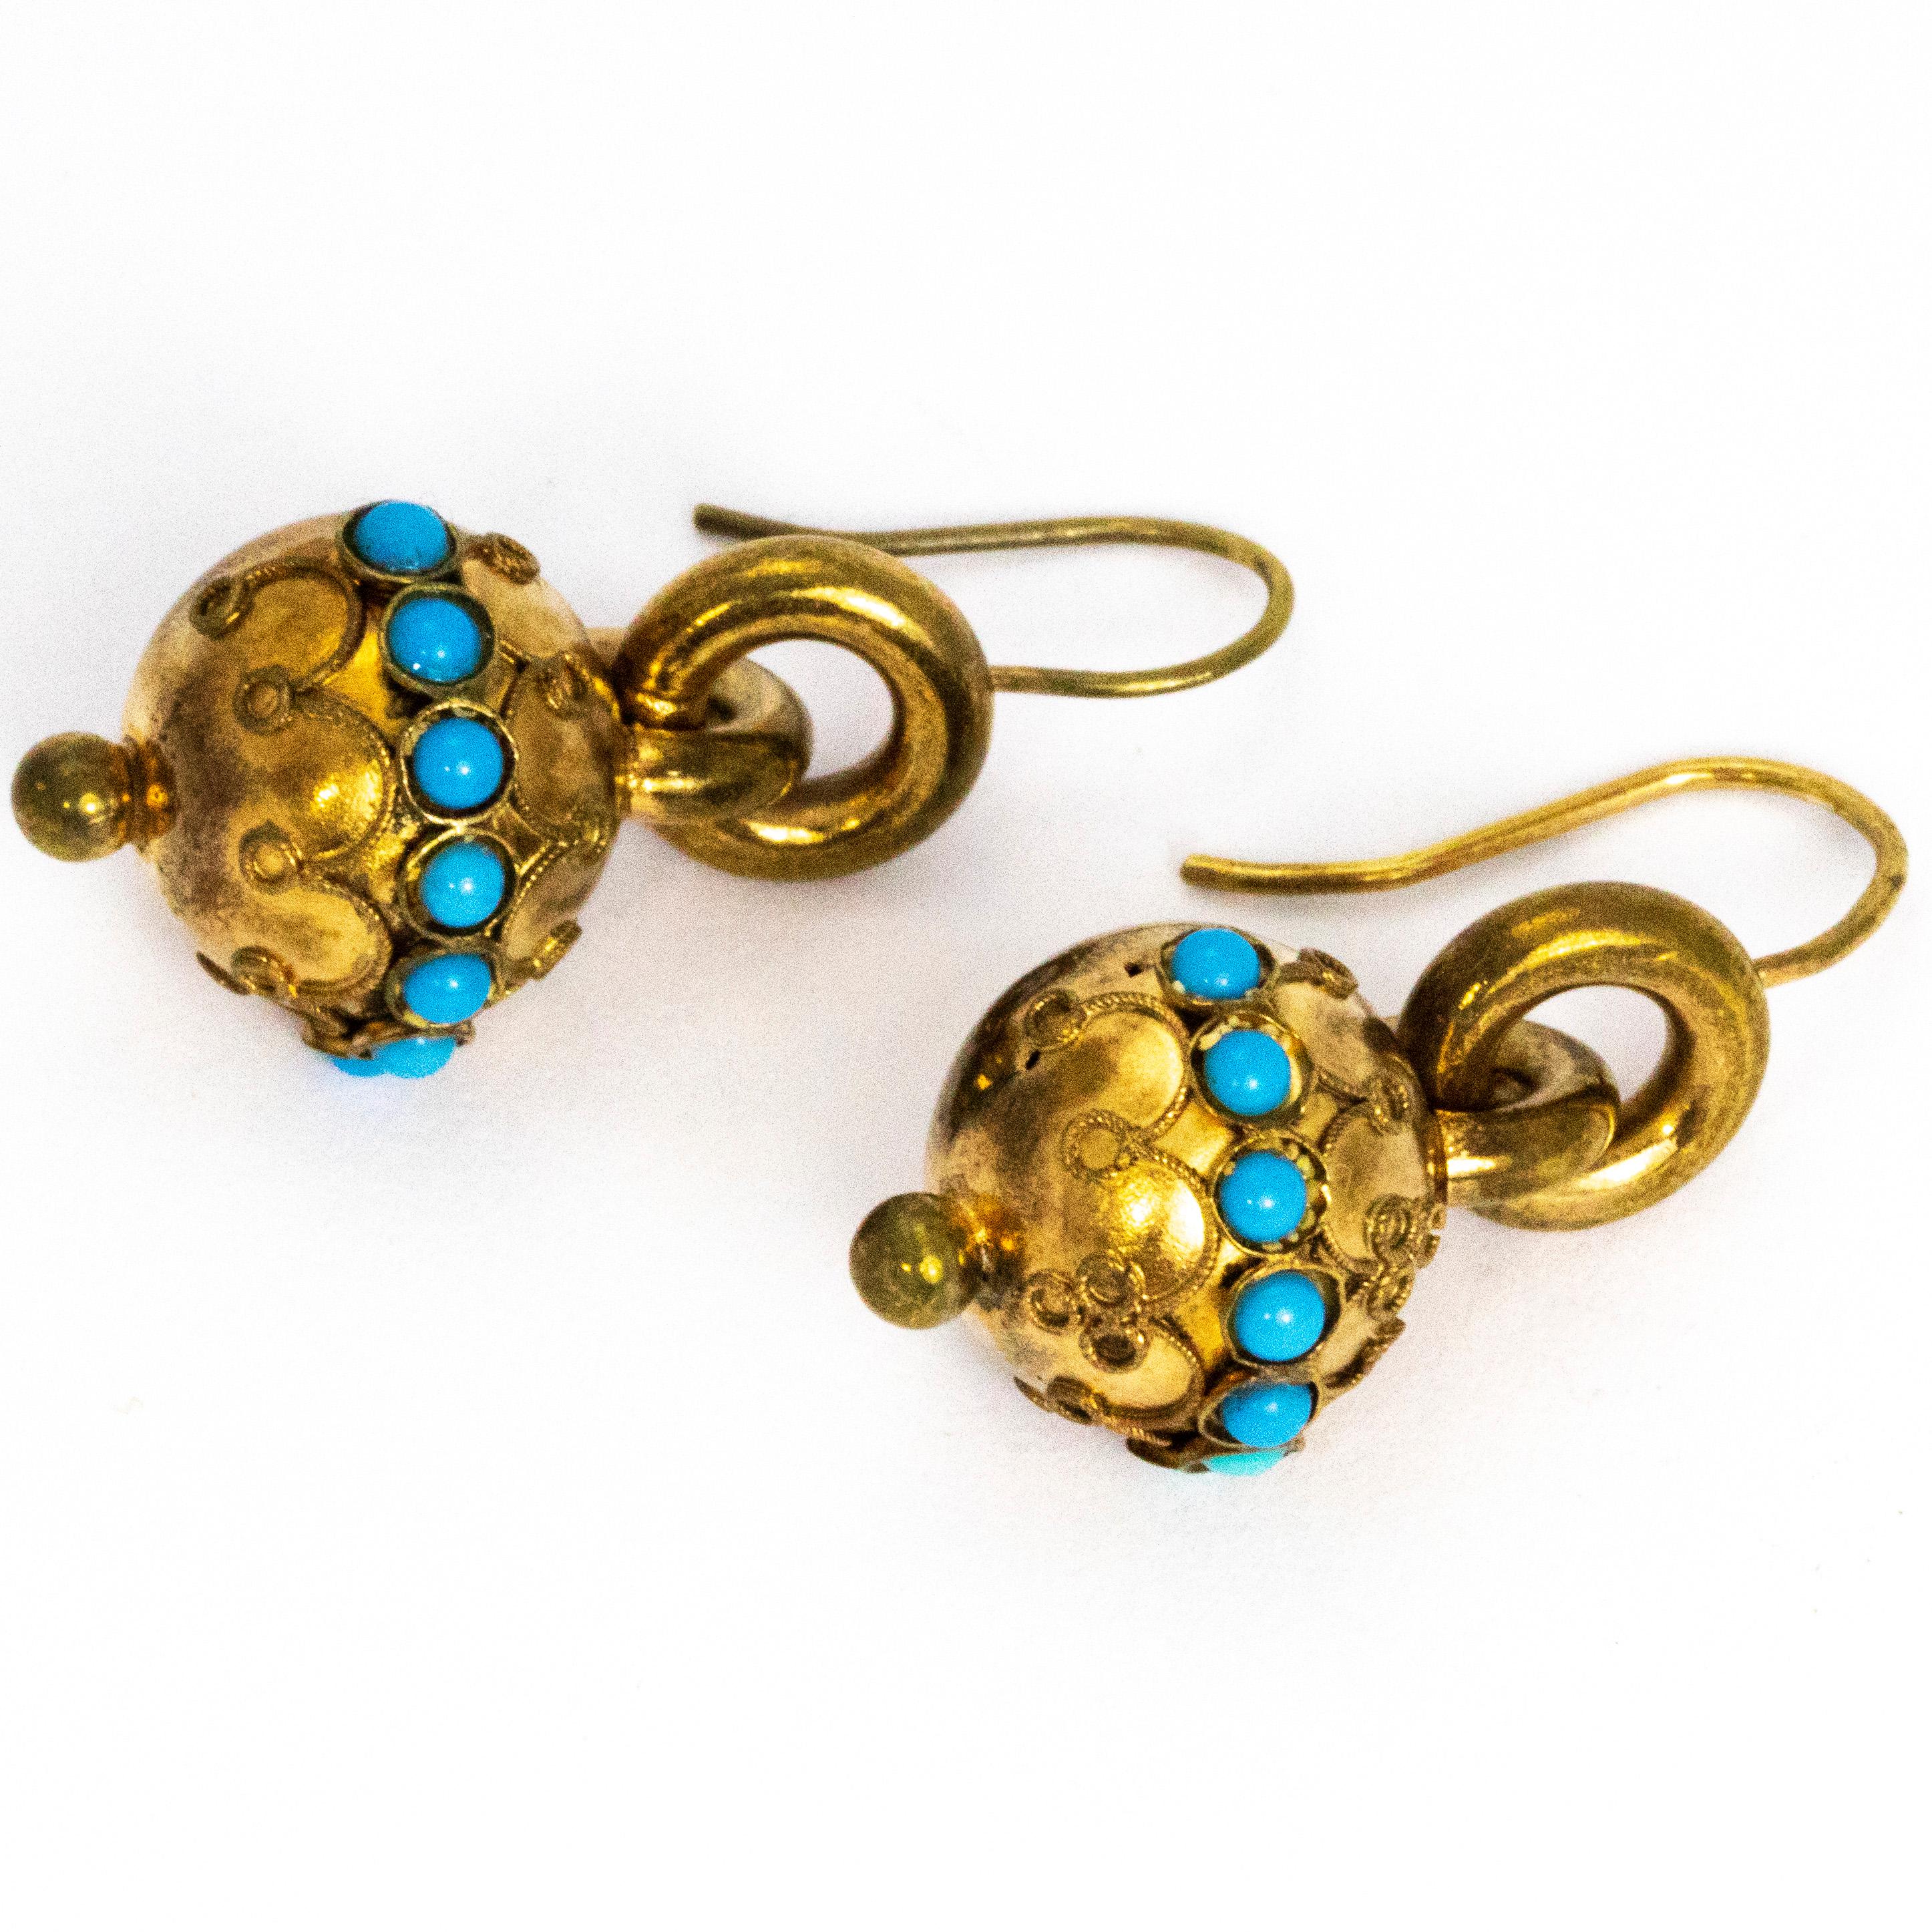 The pop of colour the turquoise stones give to these gorgeous earrings a striking appearance. The orbs which carry the turquoise also have delicate chain like detail and are connected to the shepherds hook by a gorgeous chunky gold hoop.

Drop